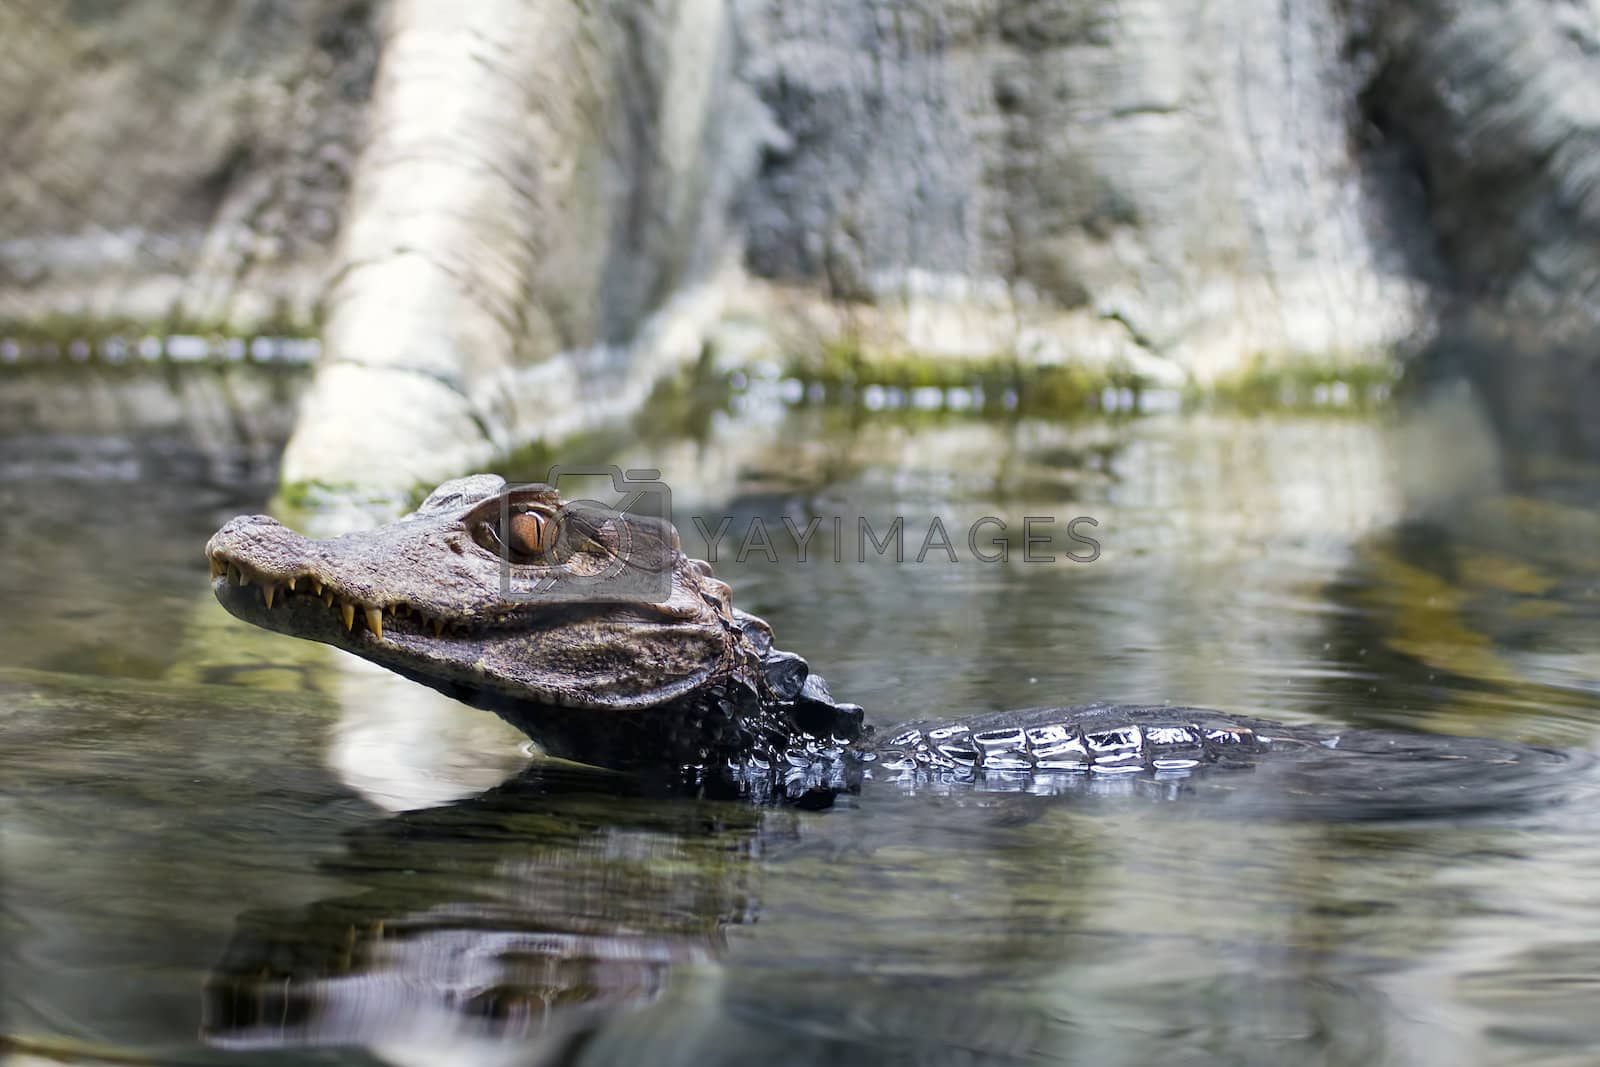 Royalty free image of Alligator Young Swimming by jpldesigns